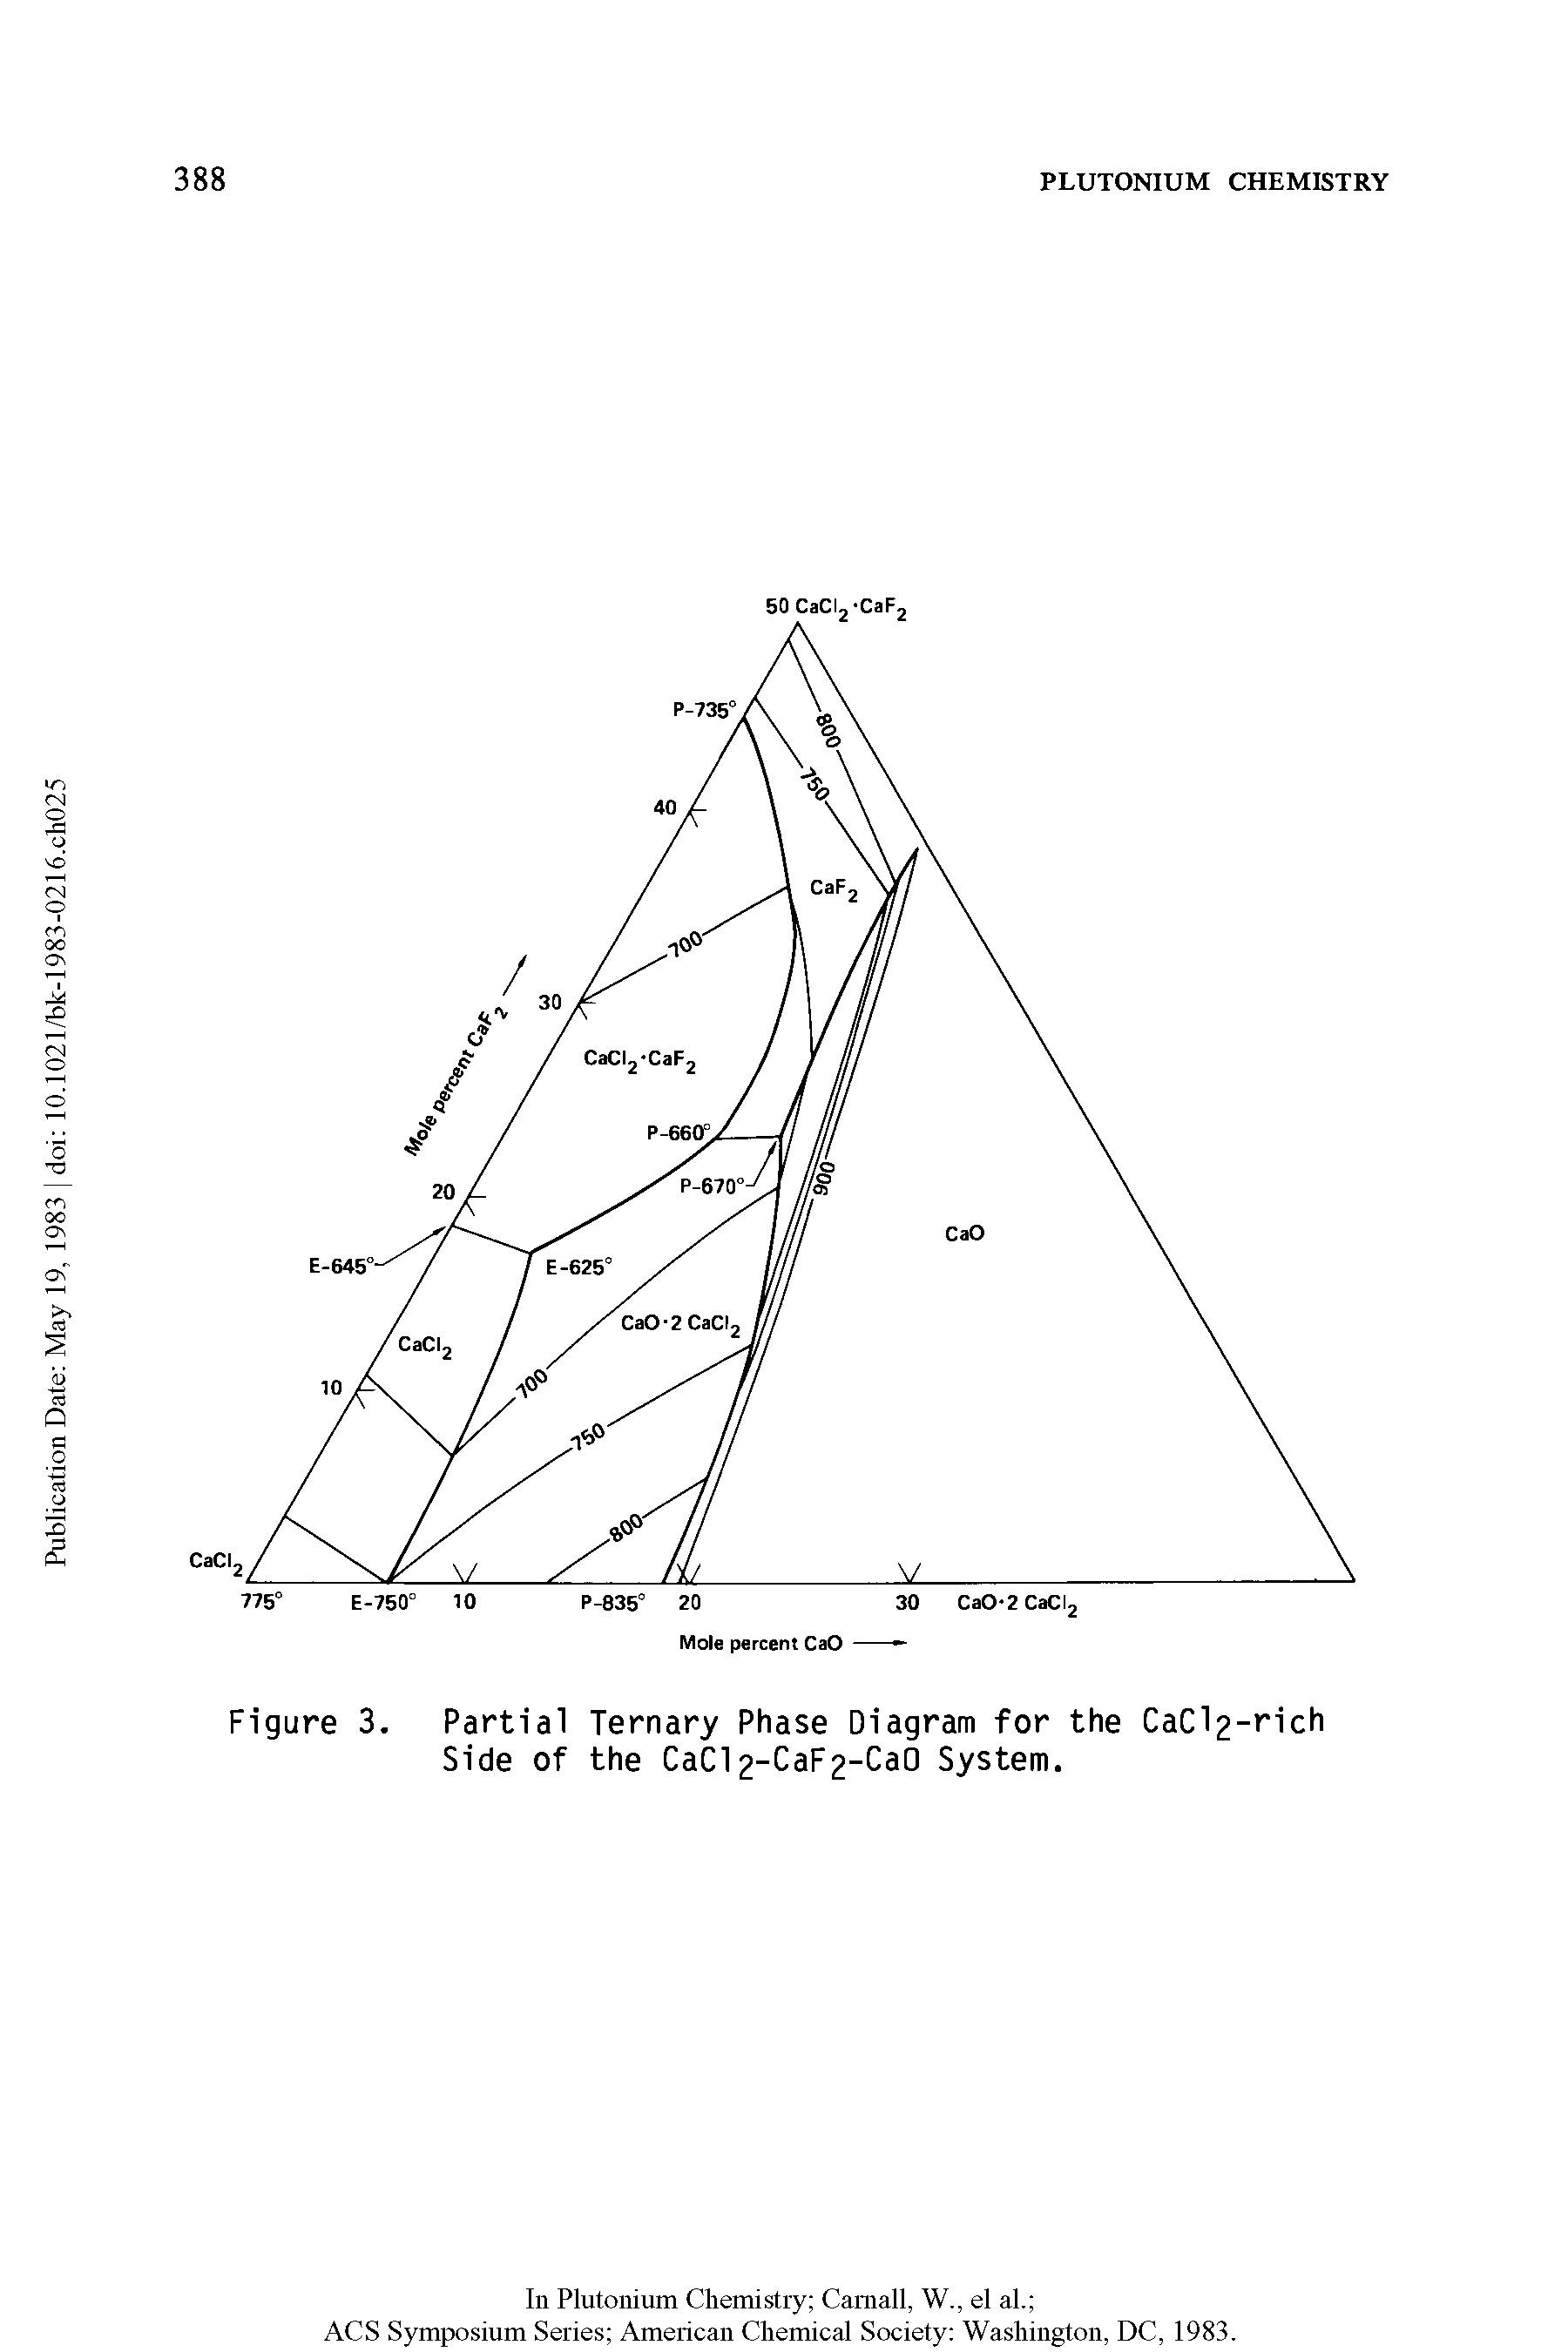 Figure 3. Partial Ternary Phase Diagram for the CaC -rich Side of the CaCl2-CaF2-CaO System.